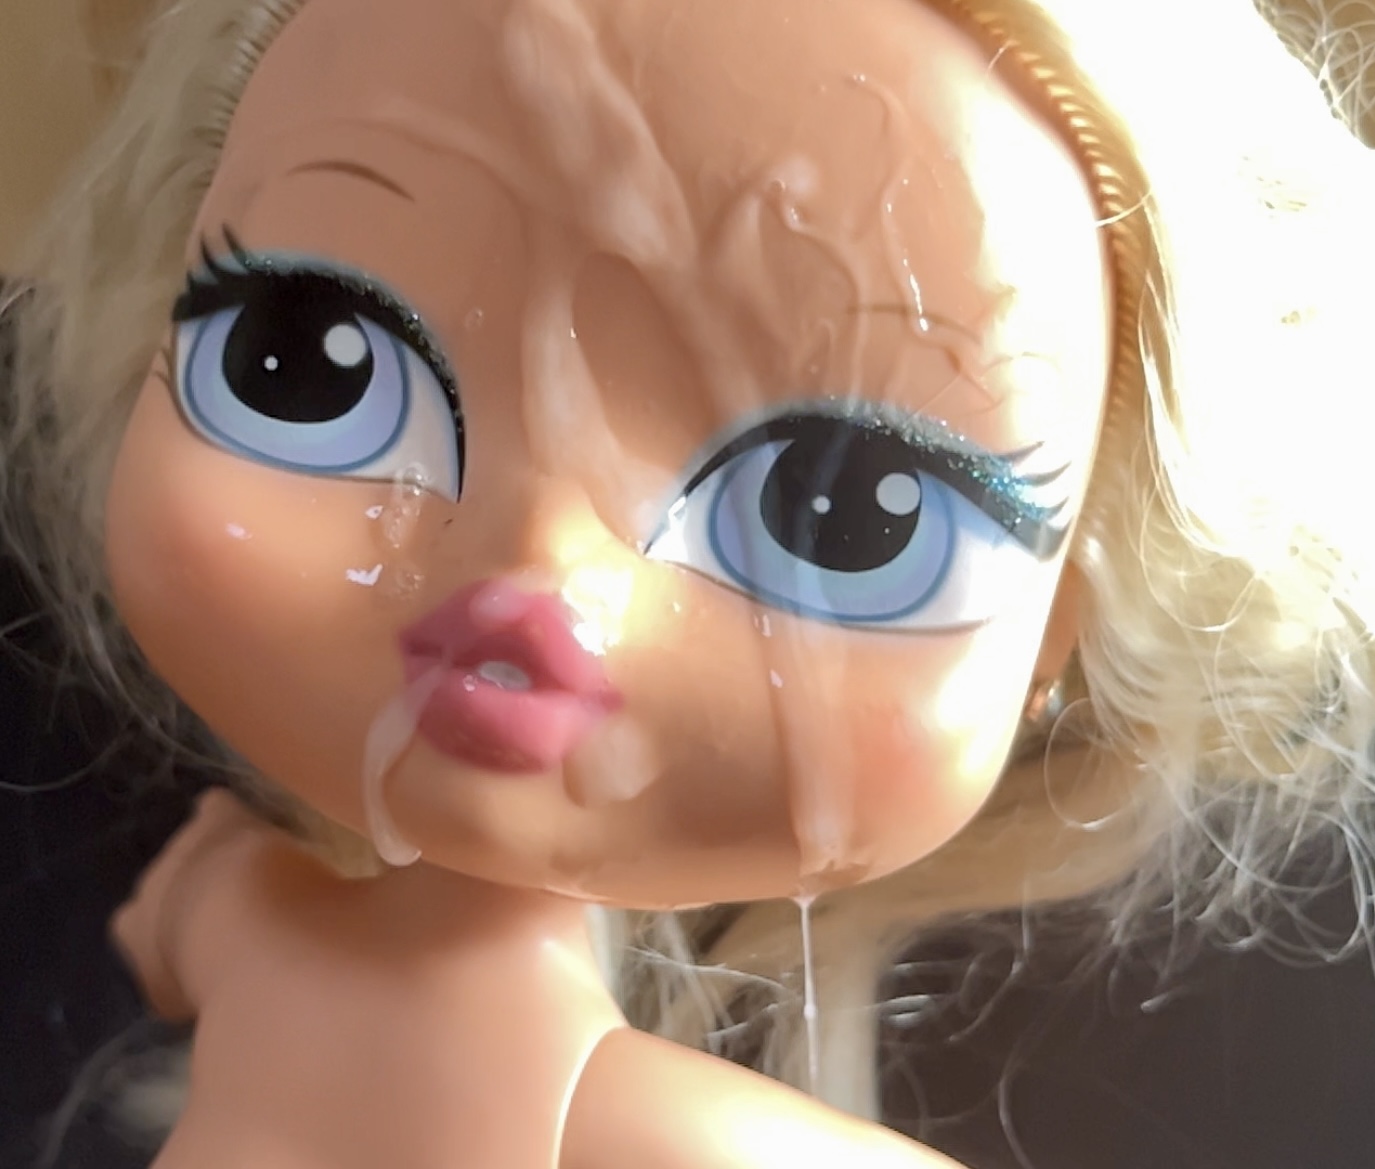 Smellly blonde secondhand store doll facial cumshot